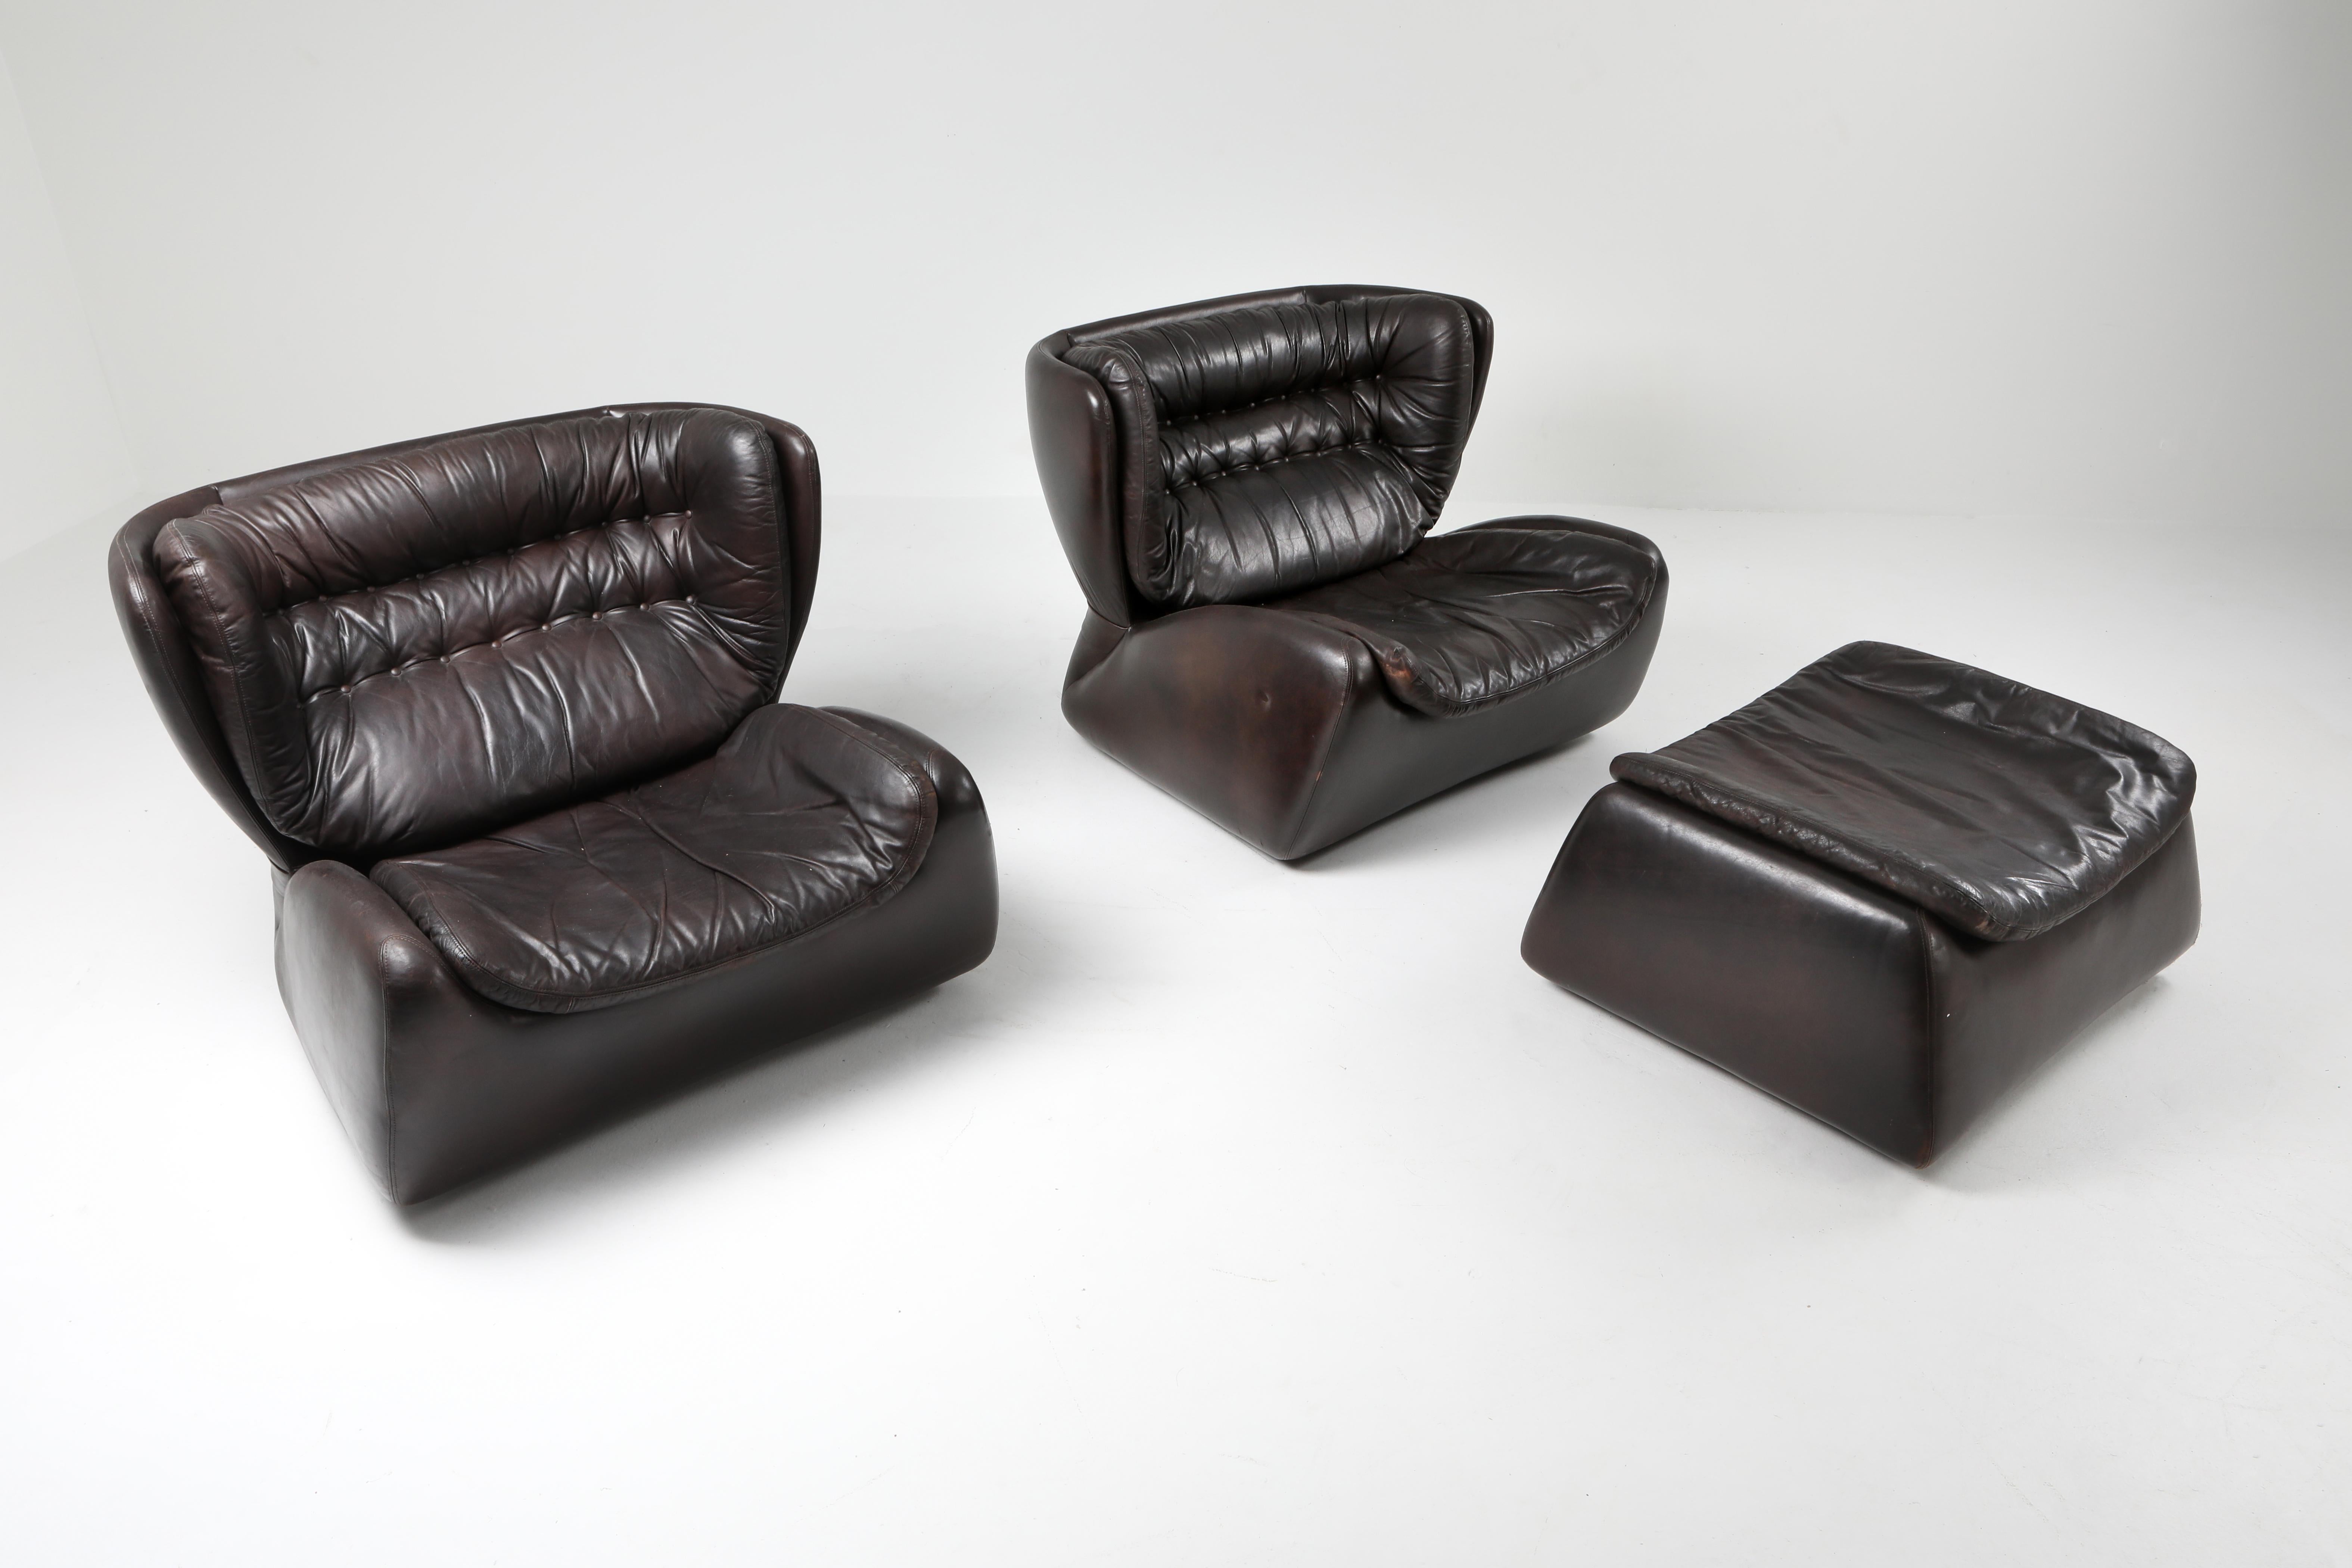 Heinz Waldmann & Anita Schmidt lounge chair for Durlet in 1970, dark chocolate brown leather, 

Durlet is a luxury leather furniture brand from Belgium, very much like De Sede in Switzerland.

In the 1970s, they had a large selection of